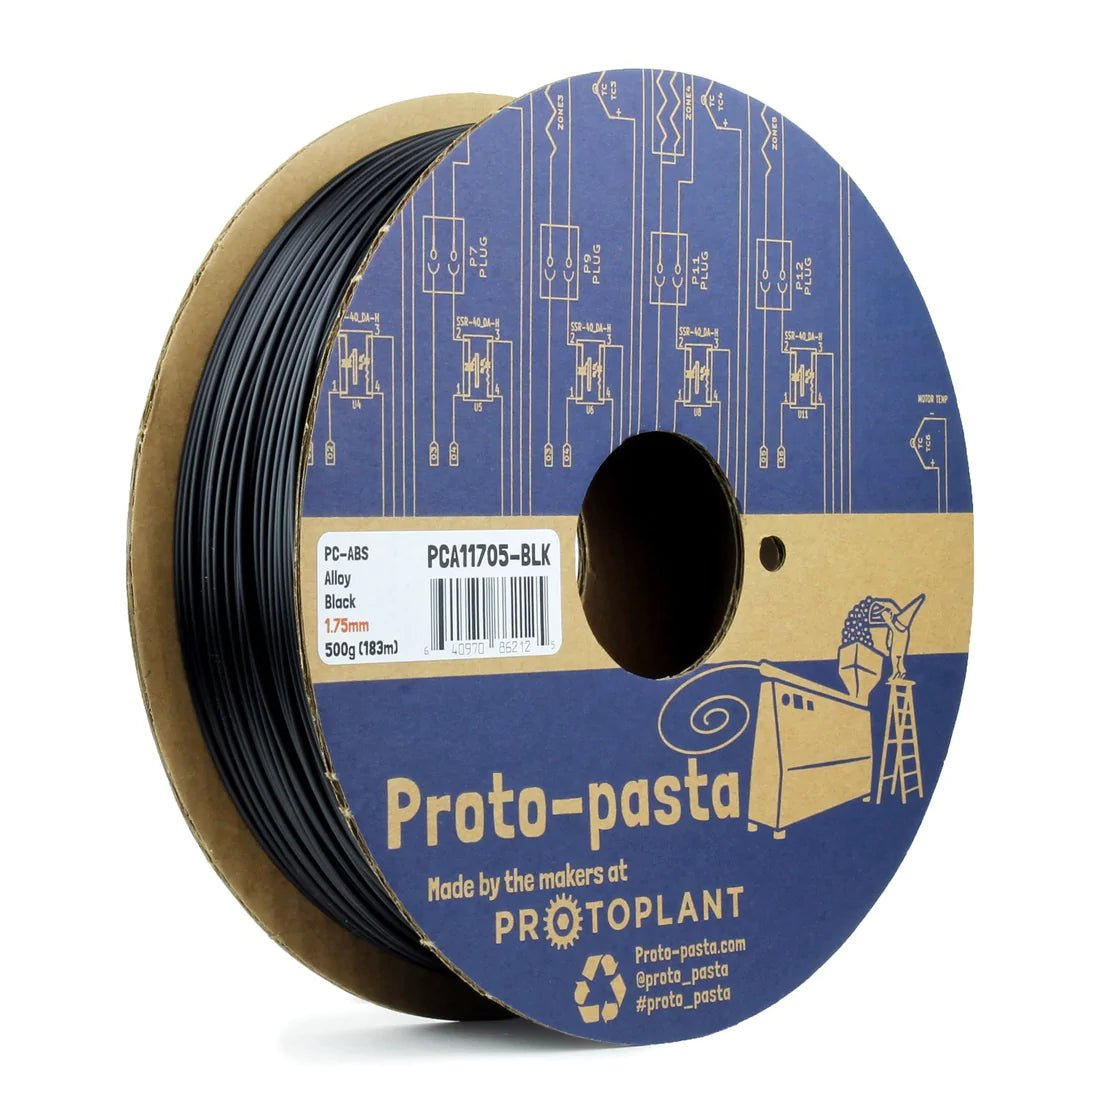 ProtoPasta High Temperature PC-ABS Alloy Filament 1.75mm (Cardboard Spools - 500g) Polycarbonate-ABS Alloy - West3D Printing - ProtoPasta